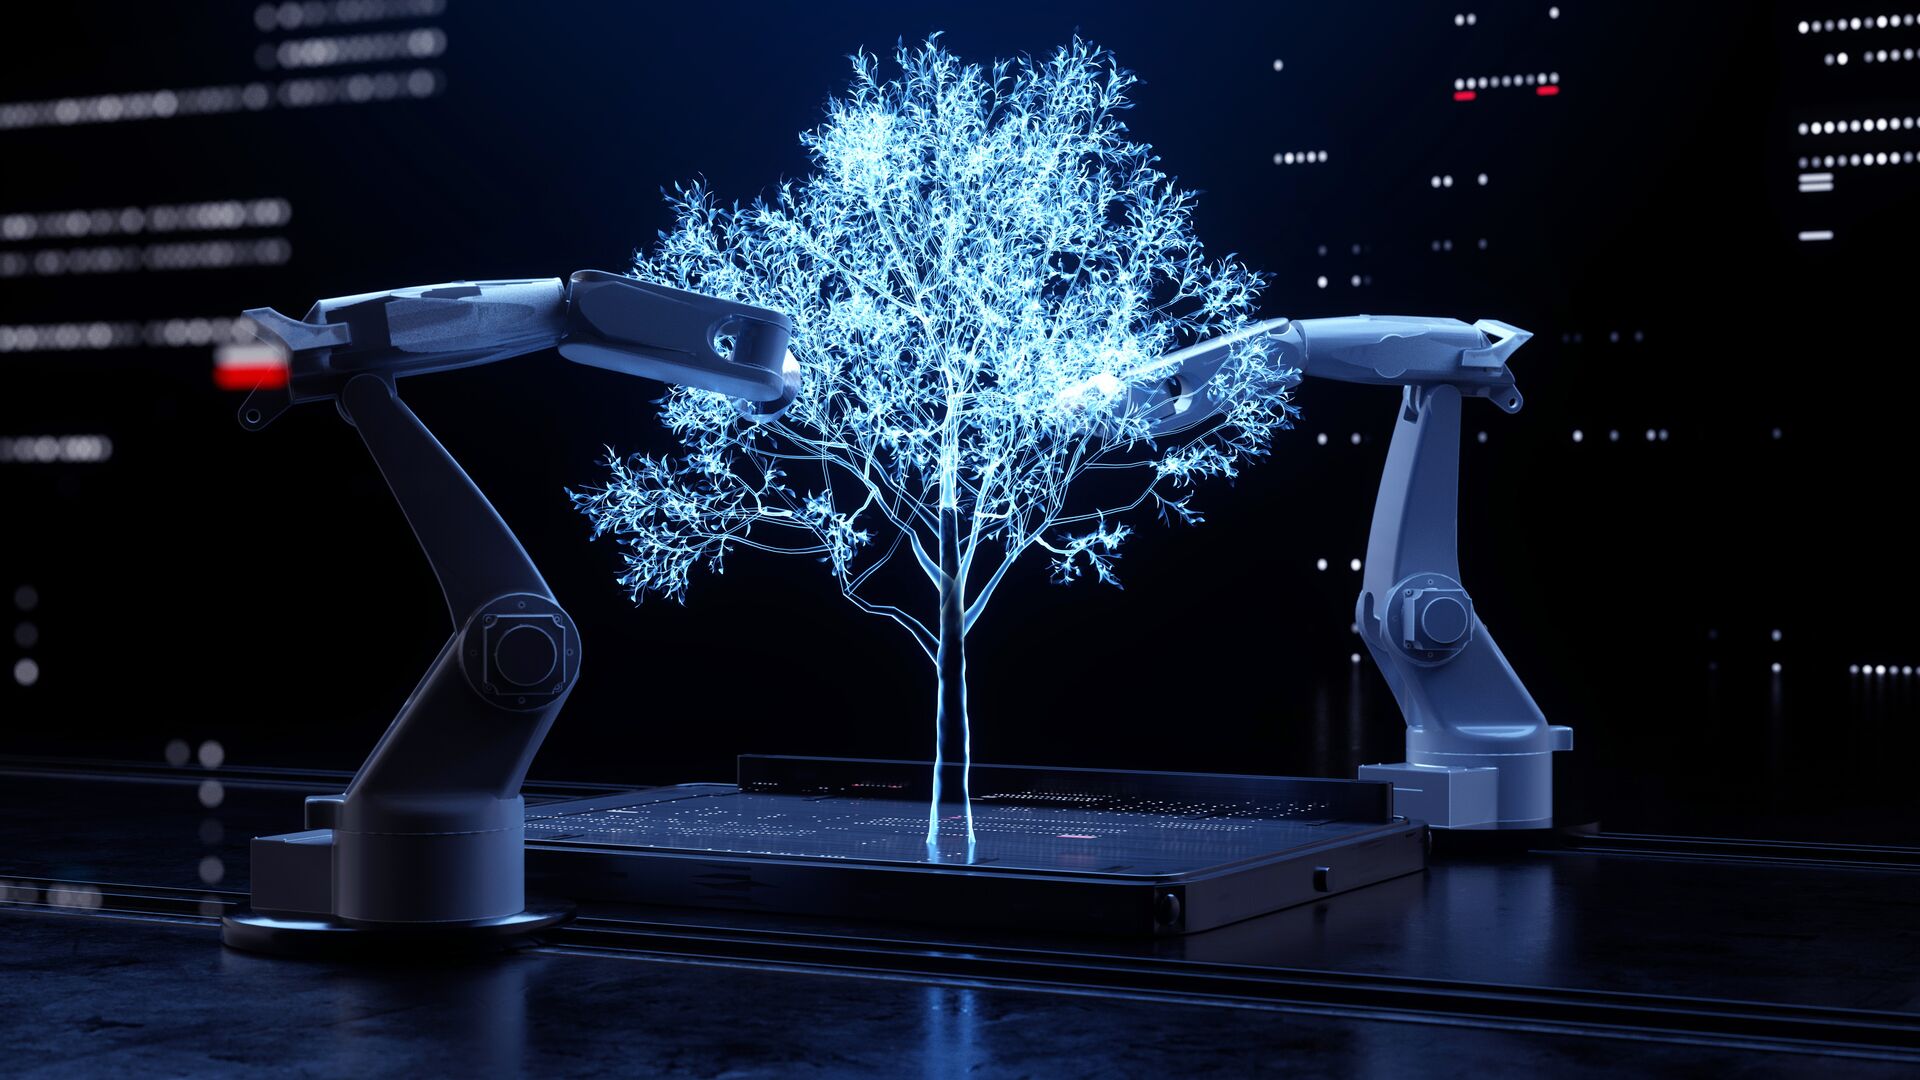 Concept around the premise that robotics is a key tool for combating climate change, fostering sustainable industry, and supporting ESG. The image is of two assembly robots making a digital rendering of a tree, effectively growing and nurturing the tree. Neon blue lighting against a black background with a city-scape visible in the background.